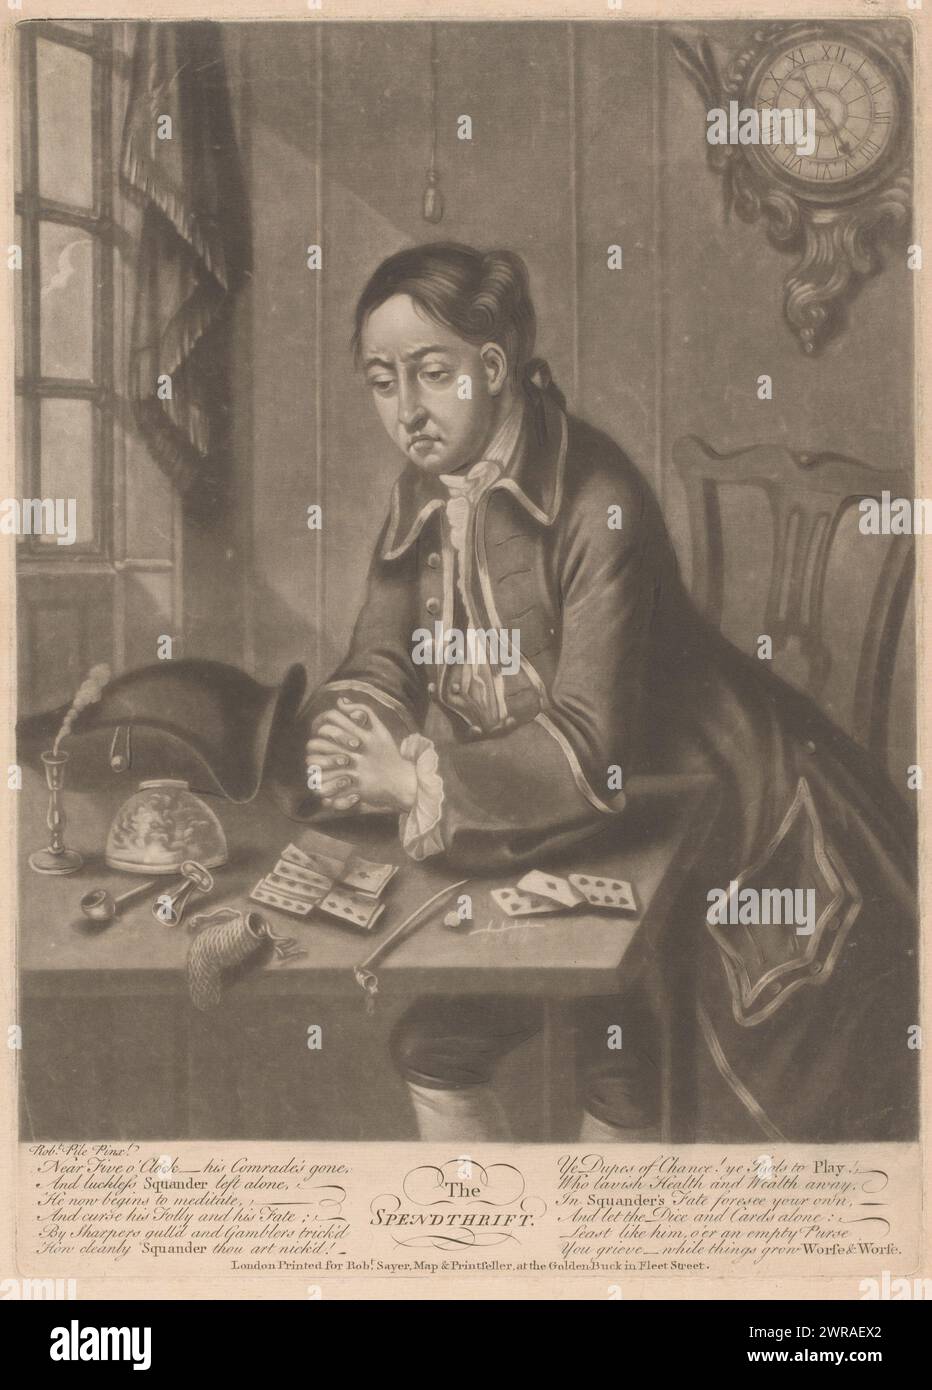 Bitter soldier in thought at a table with cards, The Spendthrift (title on object), Text in English in the bottom margin., print maker: James Wilson, (possibly), after painting by: Robert Pile, publisher: Robert Sayer, London, 1745 - 1794, paper, height 352 mm × width 252 mm, print Stock Photo